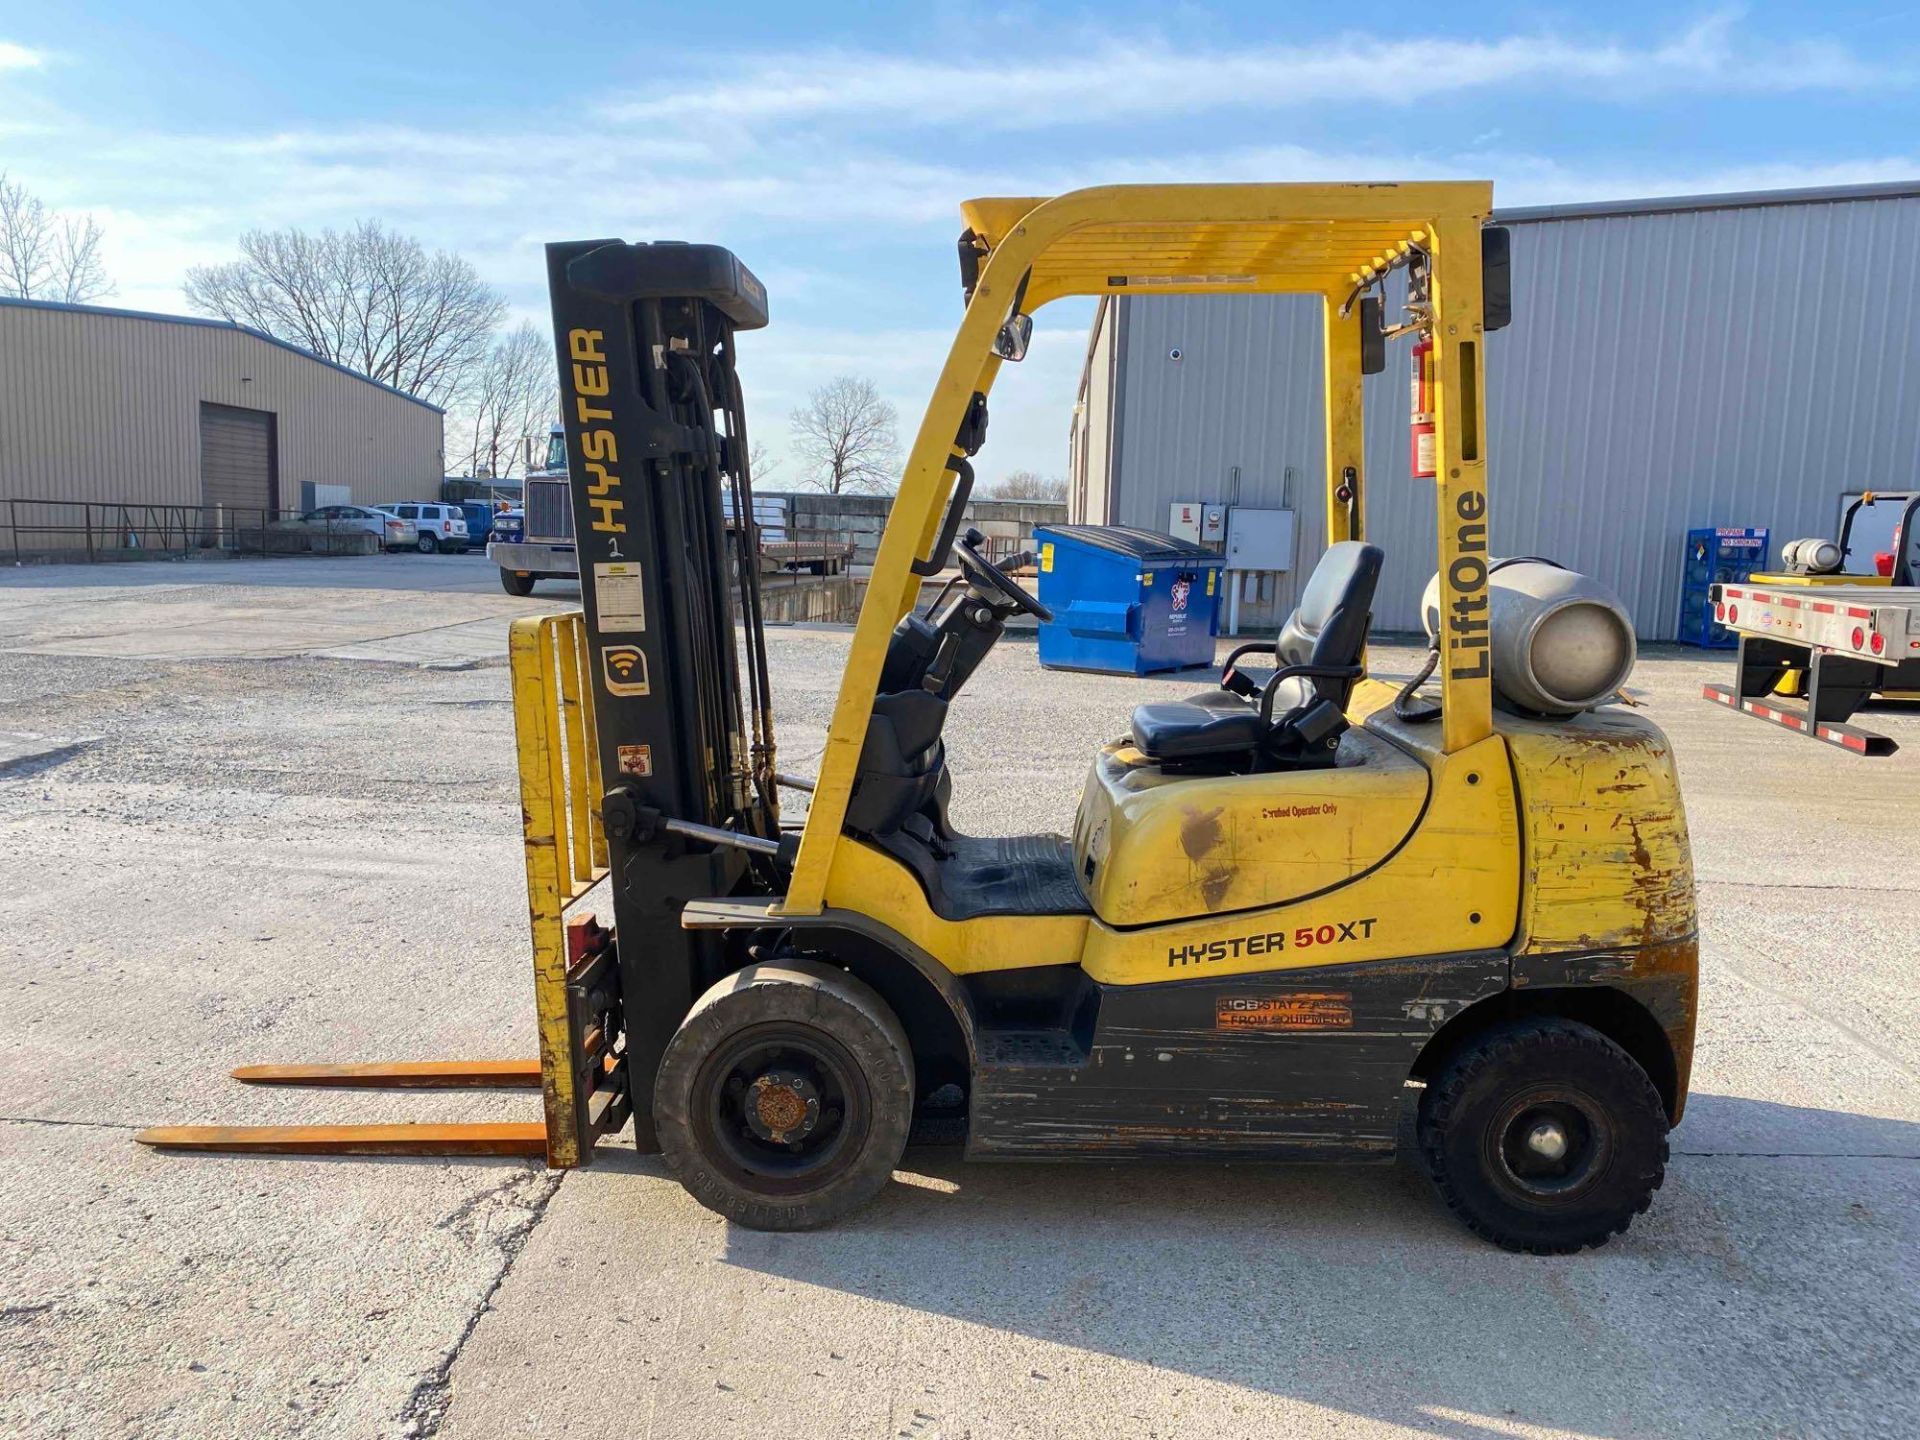 2018 Hyster H50XT 5,000 LB. Forklift, S/N A380V06798S, 195" Lift Height, Solid Cushion Tires, Sidesh - Image 2 of 13